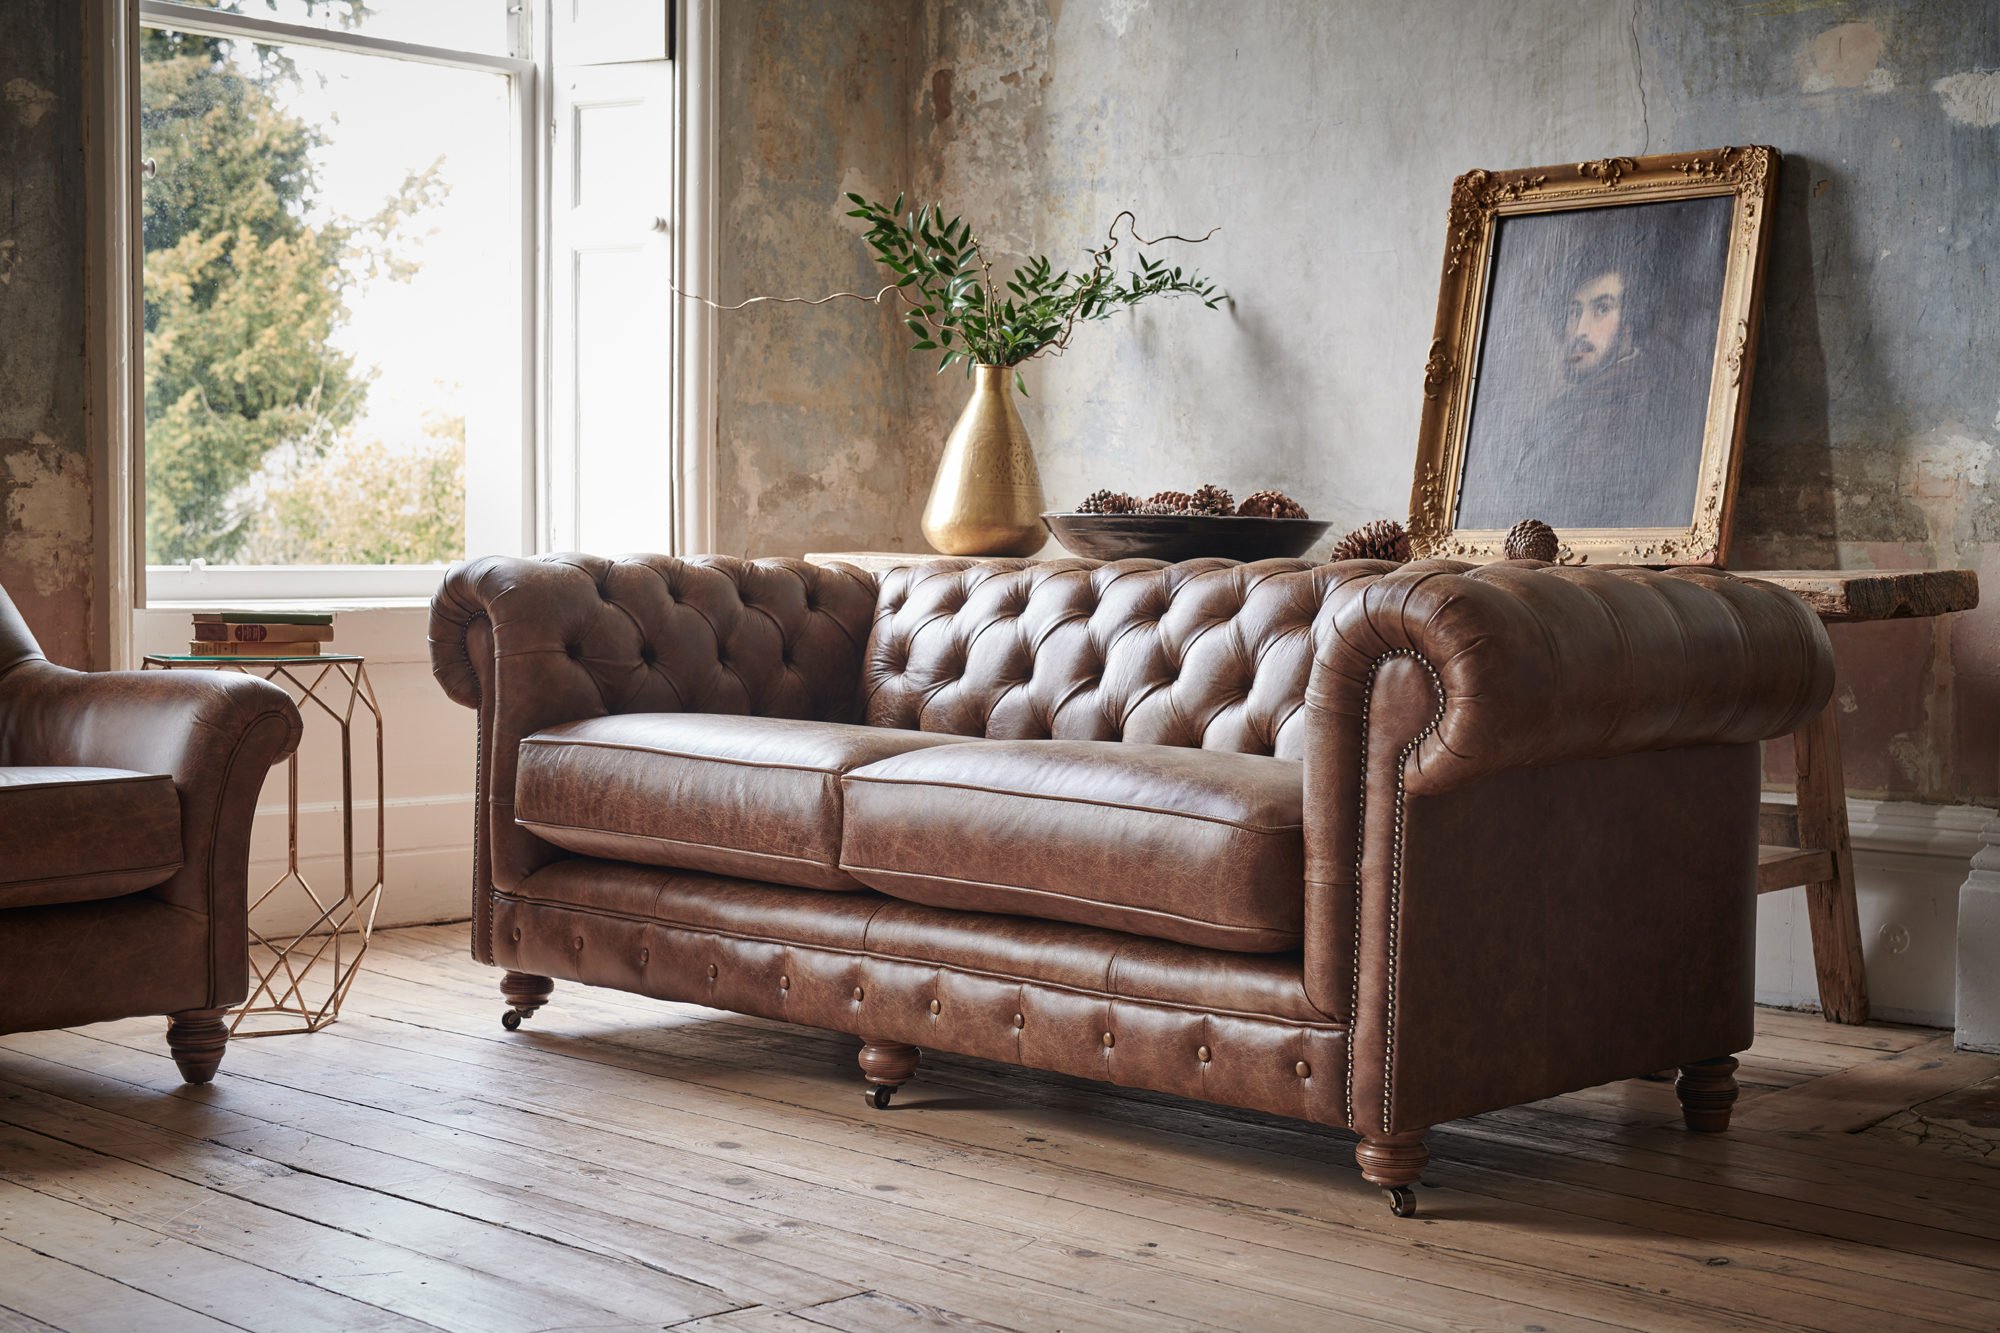 Chesterfield Leather Sofa, Types Of Chesterfield Sofas